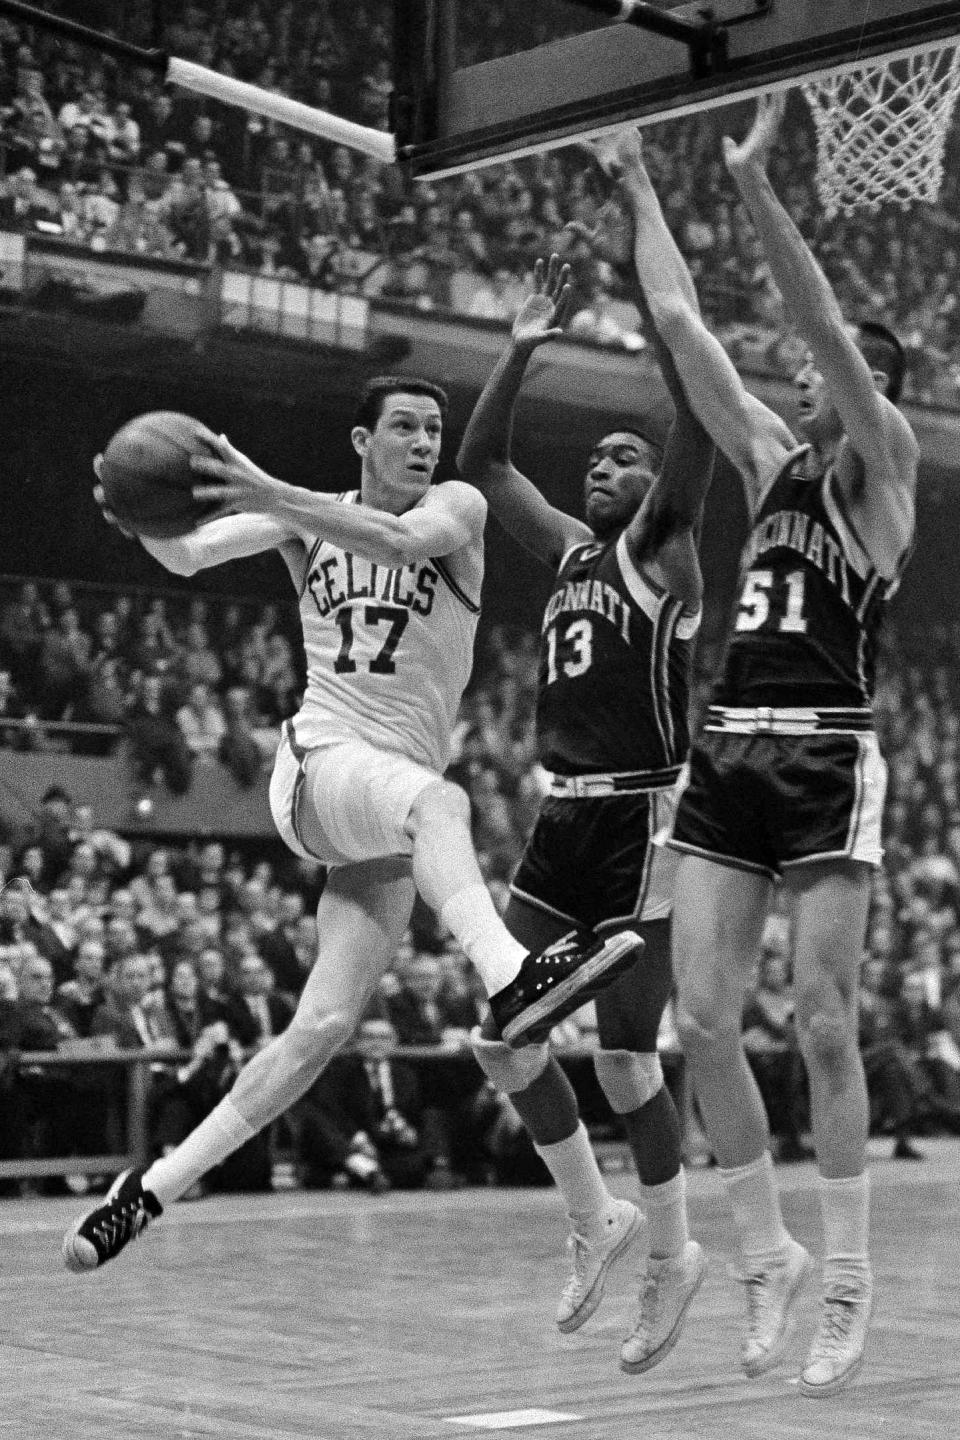 FILE - This March 31, 1963, file photo showing Boston Celtics' John Havlicek going to the basket against Cincinnati Royals Bob Booser (13) and Hub Reed in the fourth period of a semifinal playoff at Boston Garden in Boston. Havlicek, whose steal of Hal Green's inbounds pass in the final seconds of the 1965 Eastern Conference finals against the Philadelphia 76ers remains one of the most famous plays in NBA history, died April 25, 2019. He was 79. (AP Photo/Frank C. Curtin, File)